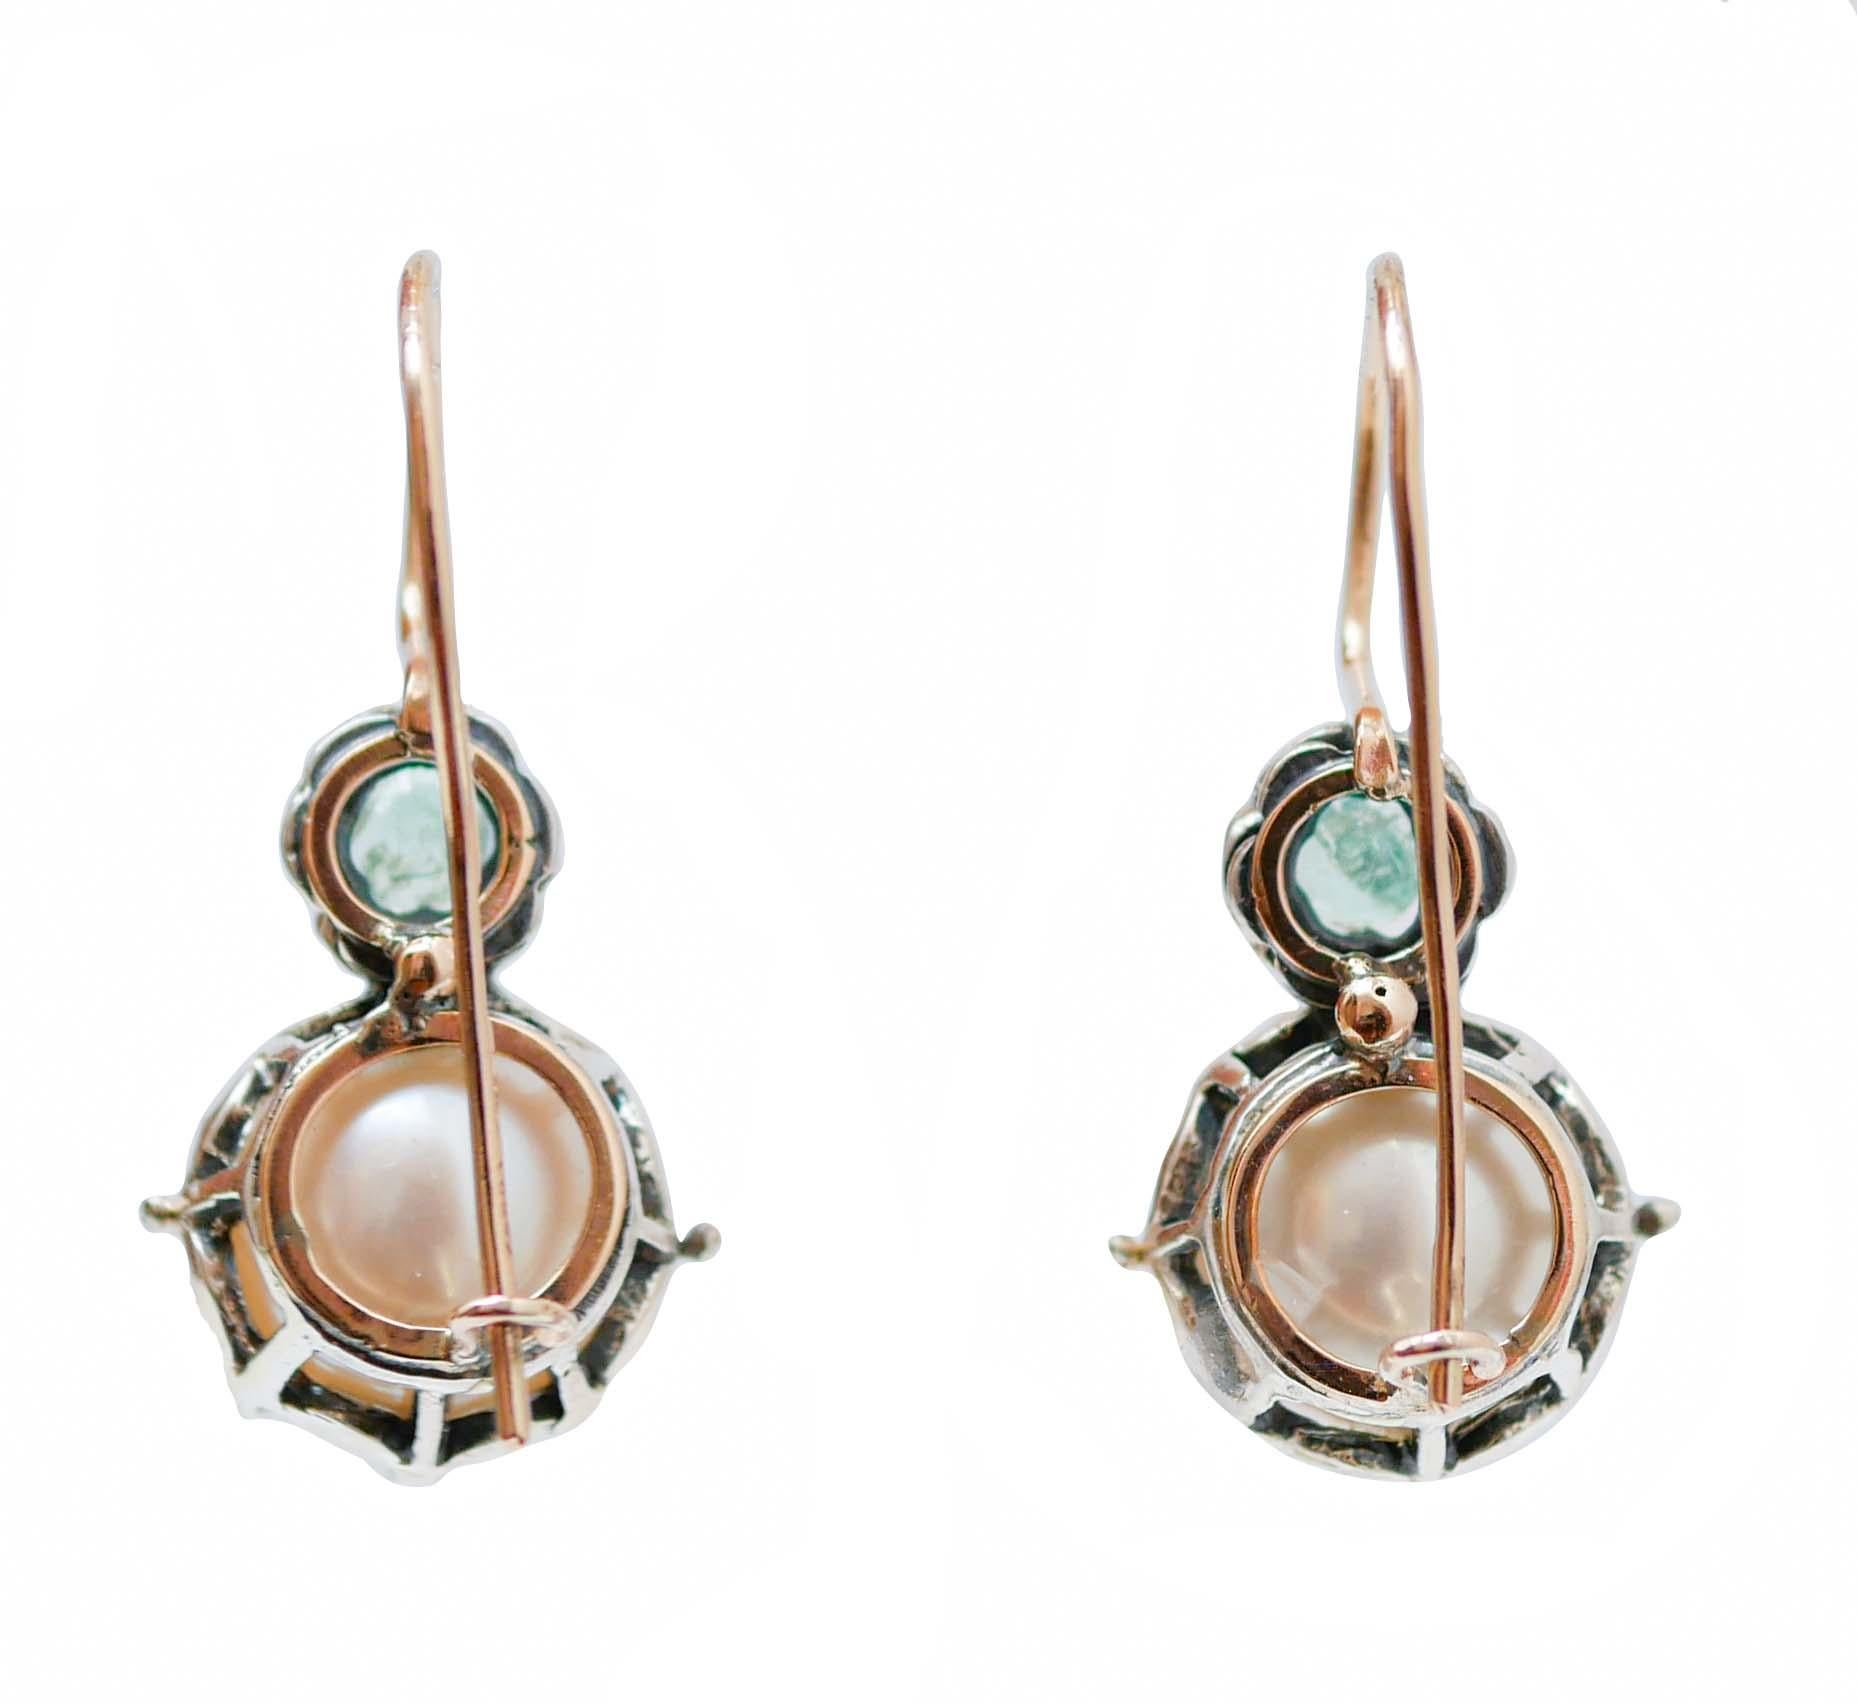 Retro Pearls, Emeralds, Rose Gold and Silver Retrò Earrings. For Sale